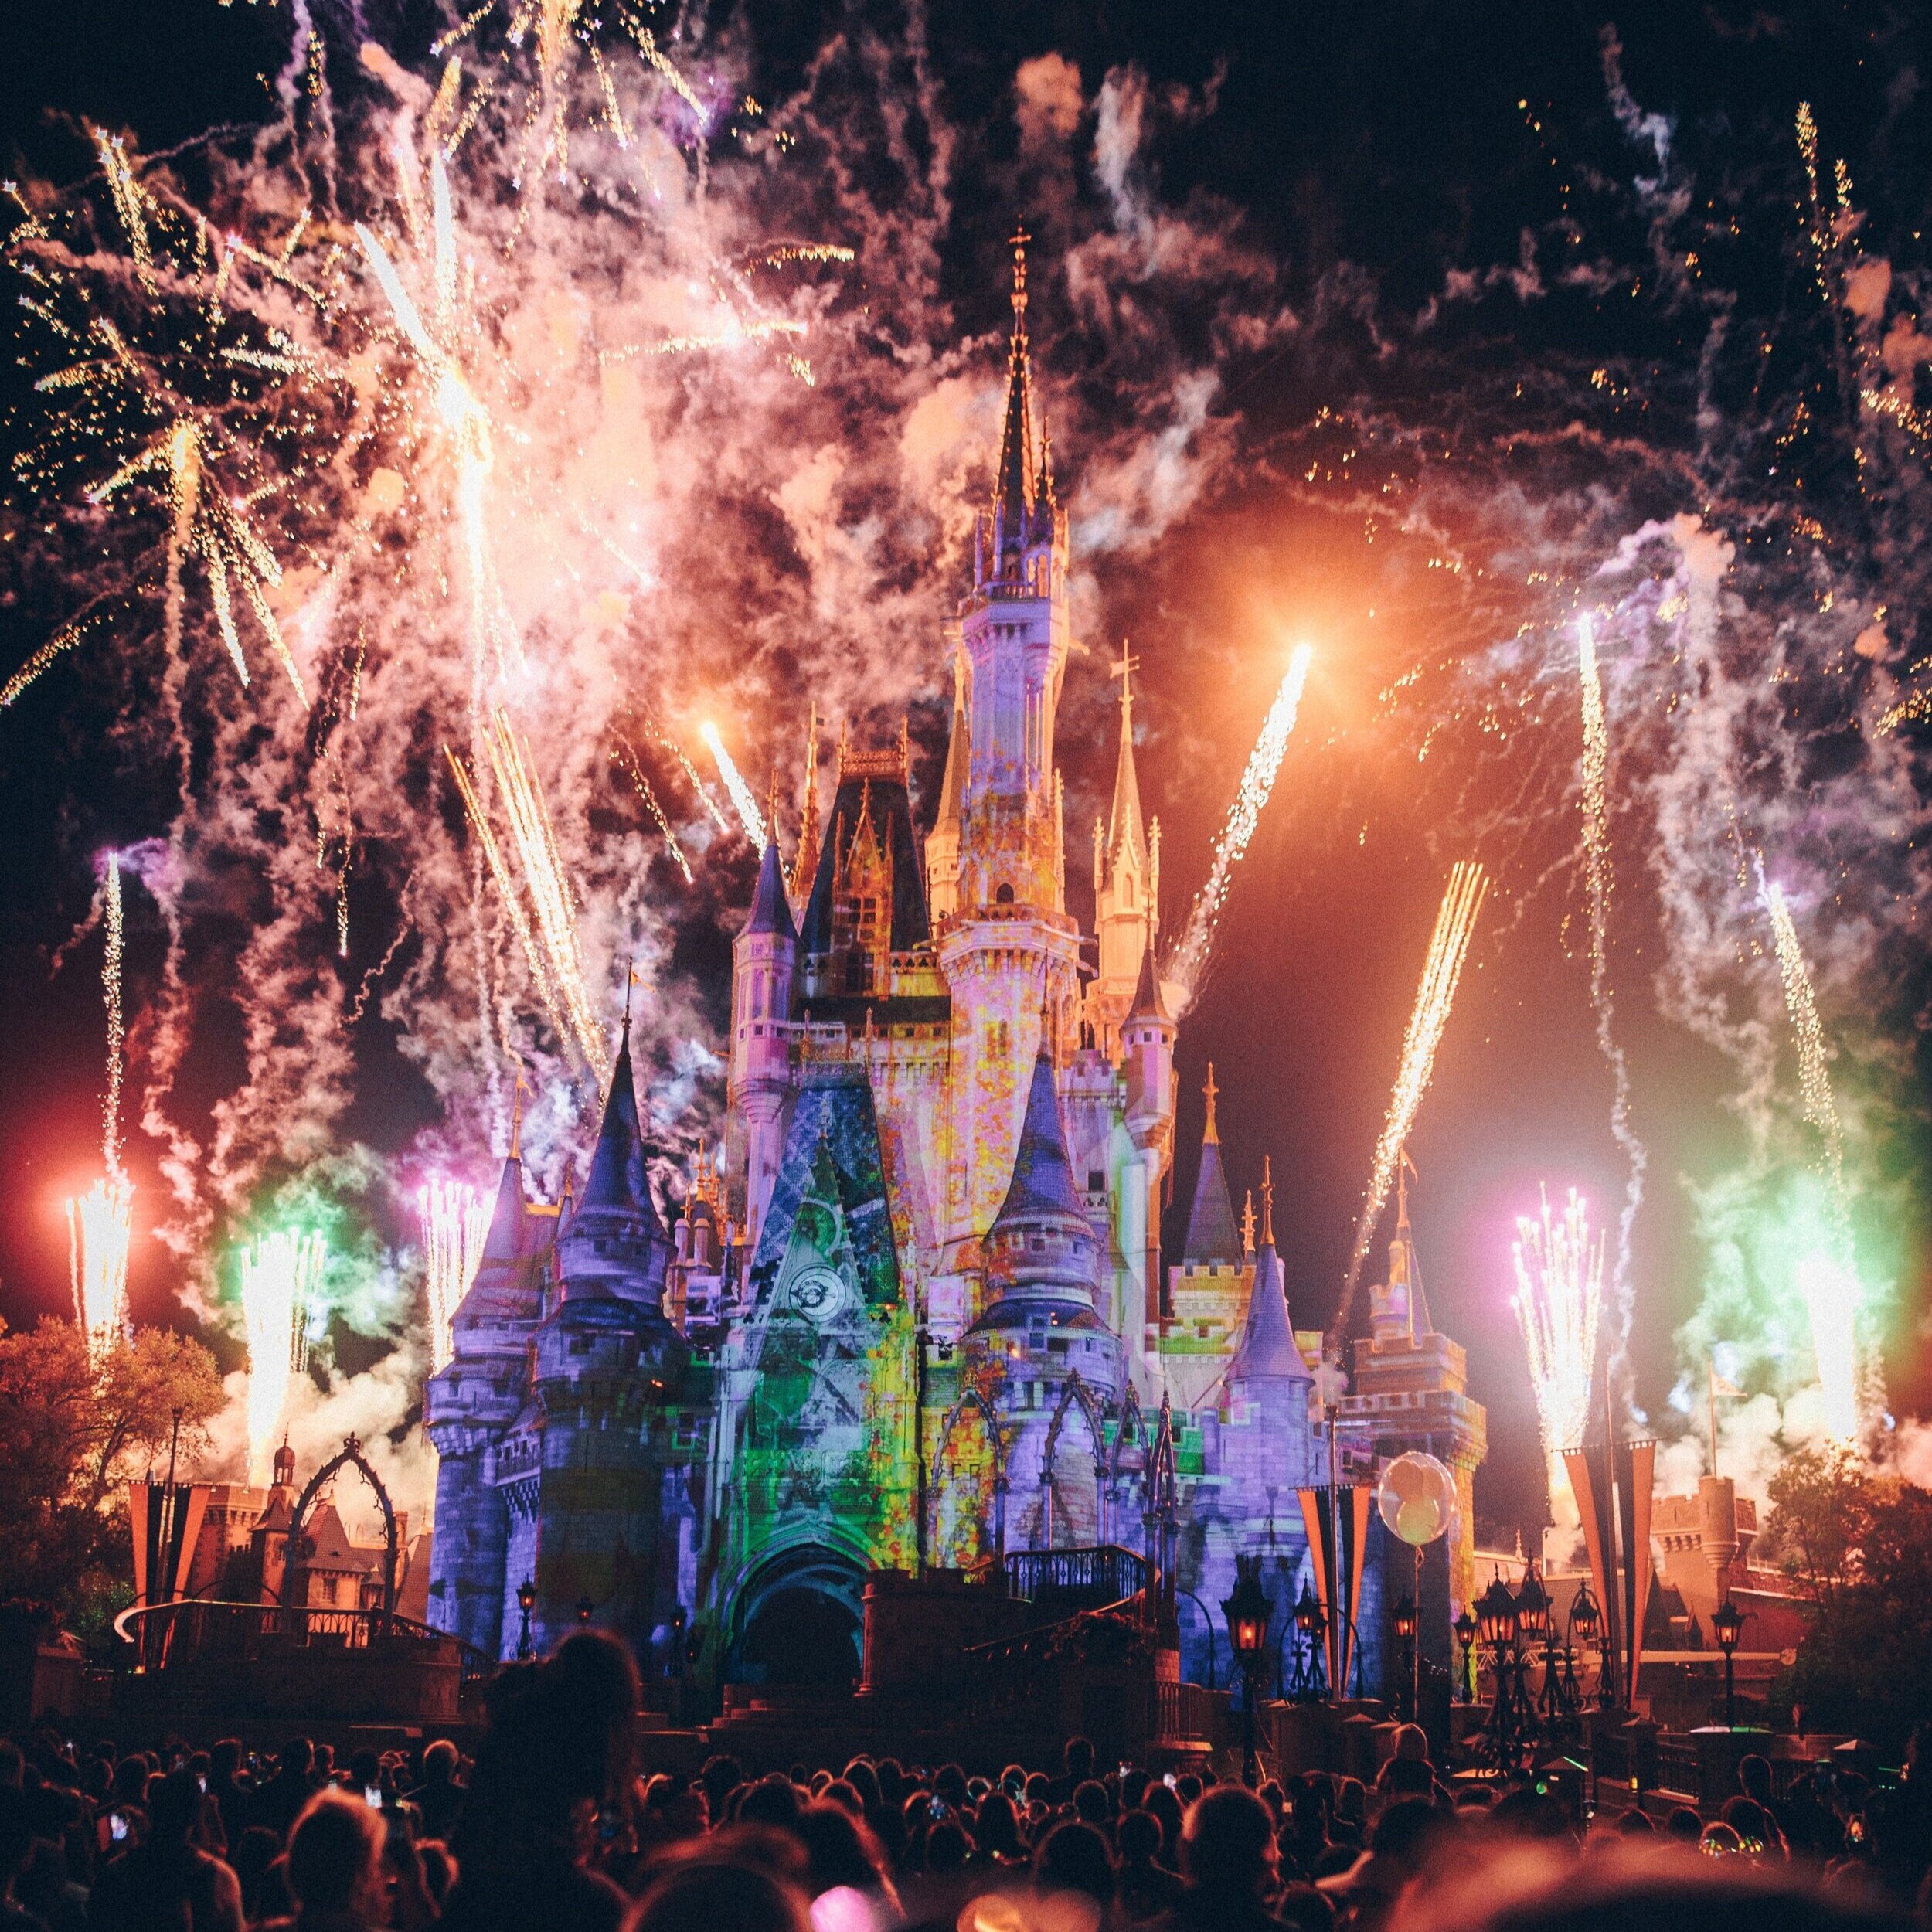 How To Spend a Virtual Day at Disney's Magic Kingdom